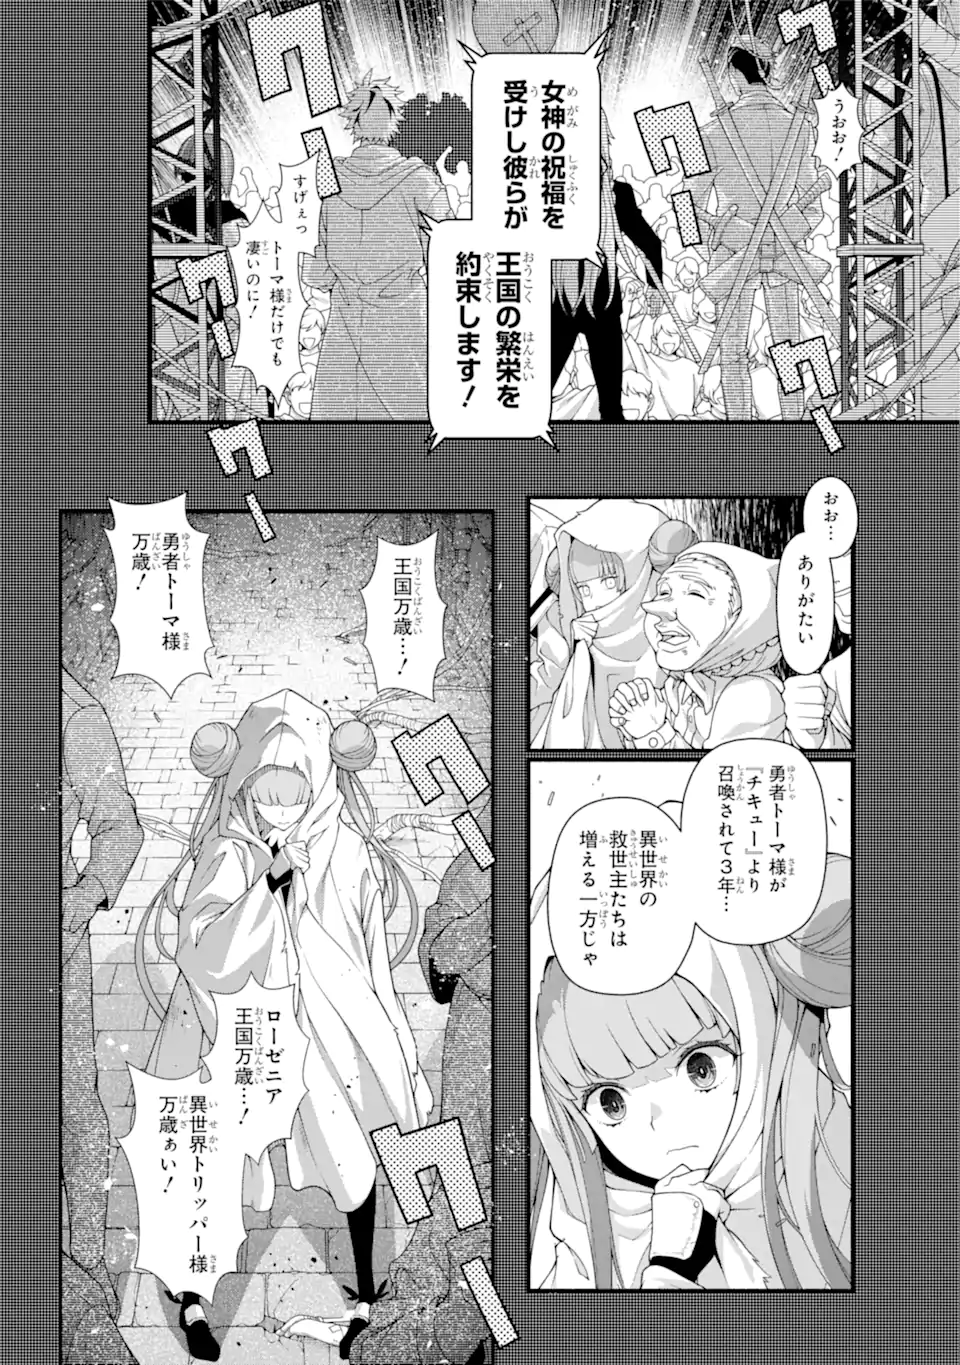 Isekai Cheat Breakers - Chapter 1.1 - Page 6